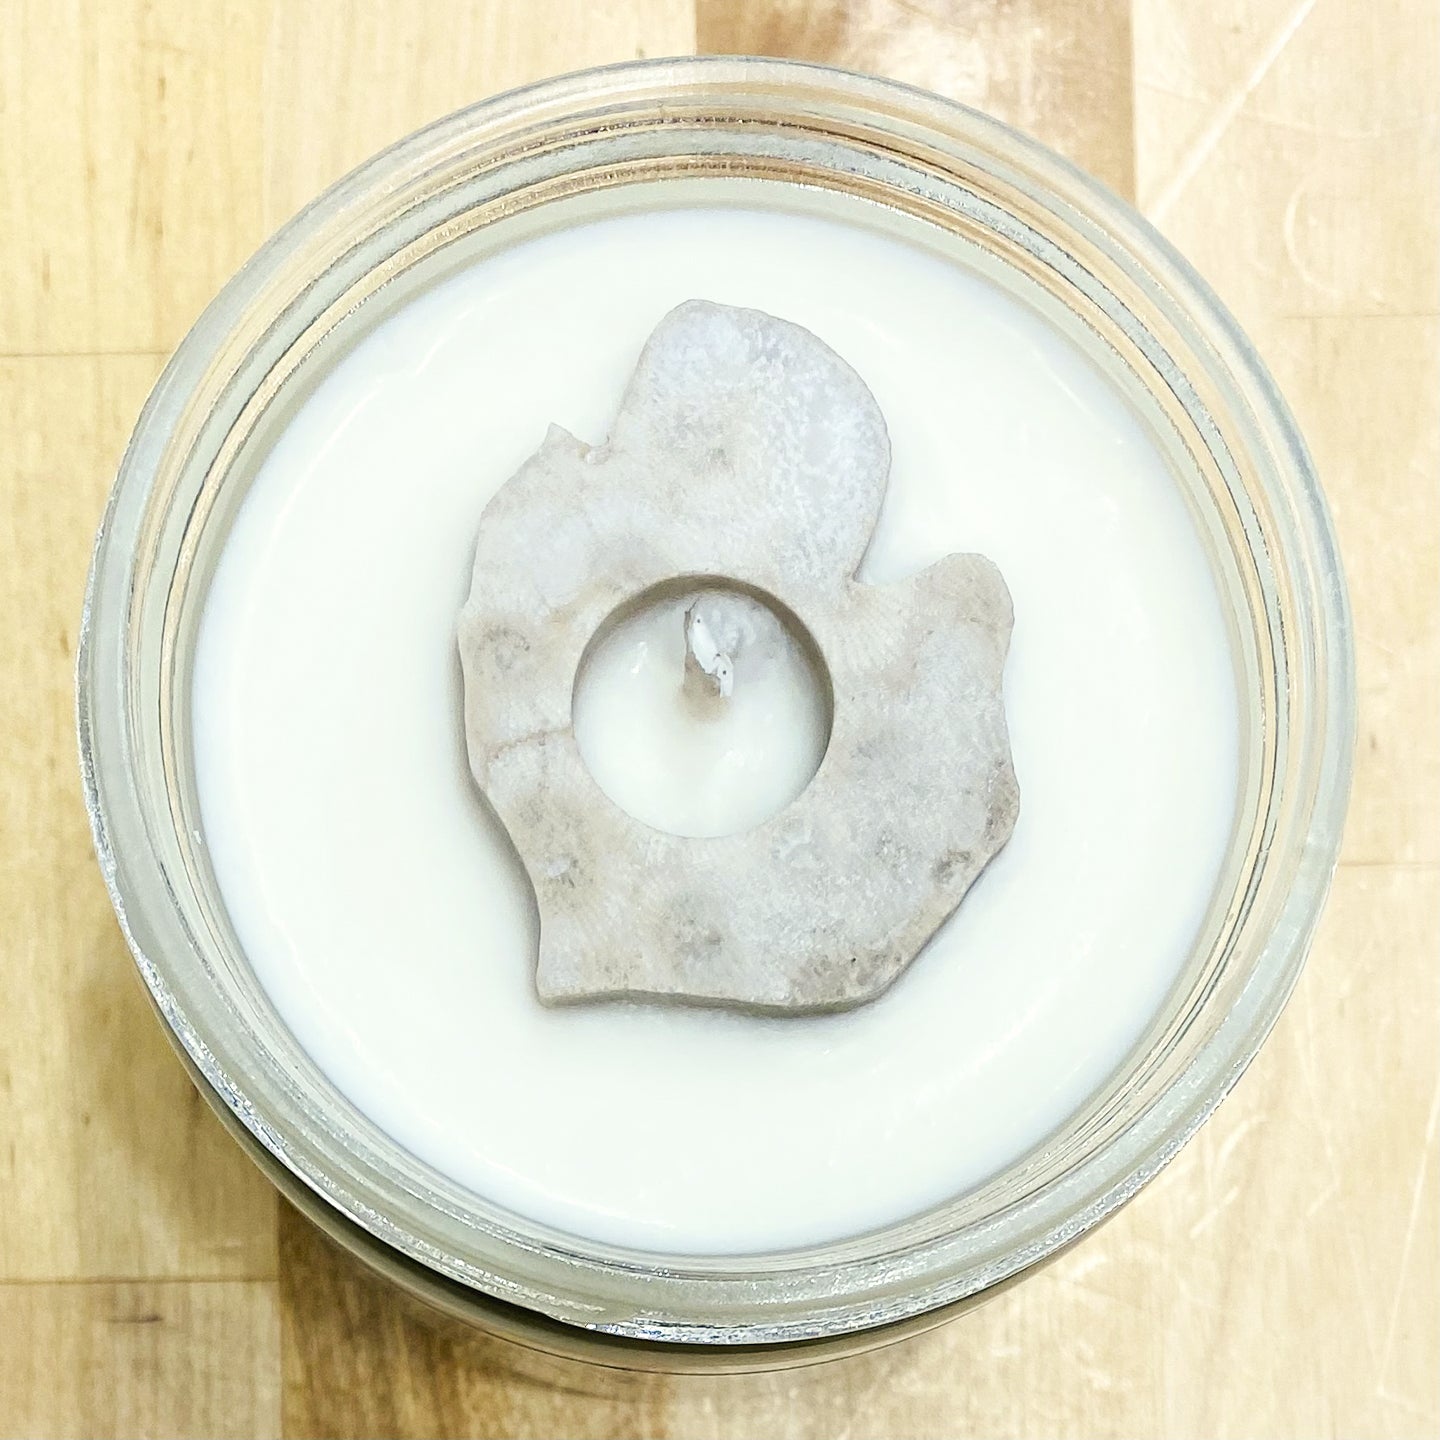 Soy wax candle with Petoskey Stone in the shape of the Michigan mittenby Ava's Illuminations handmade in northern Michigan. 